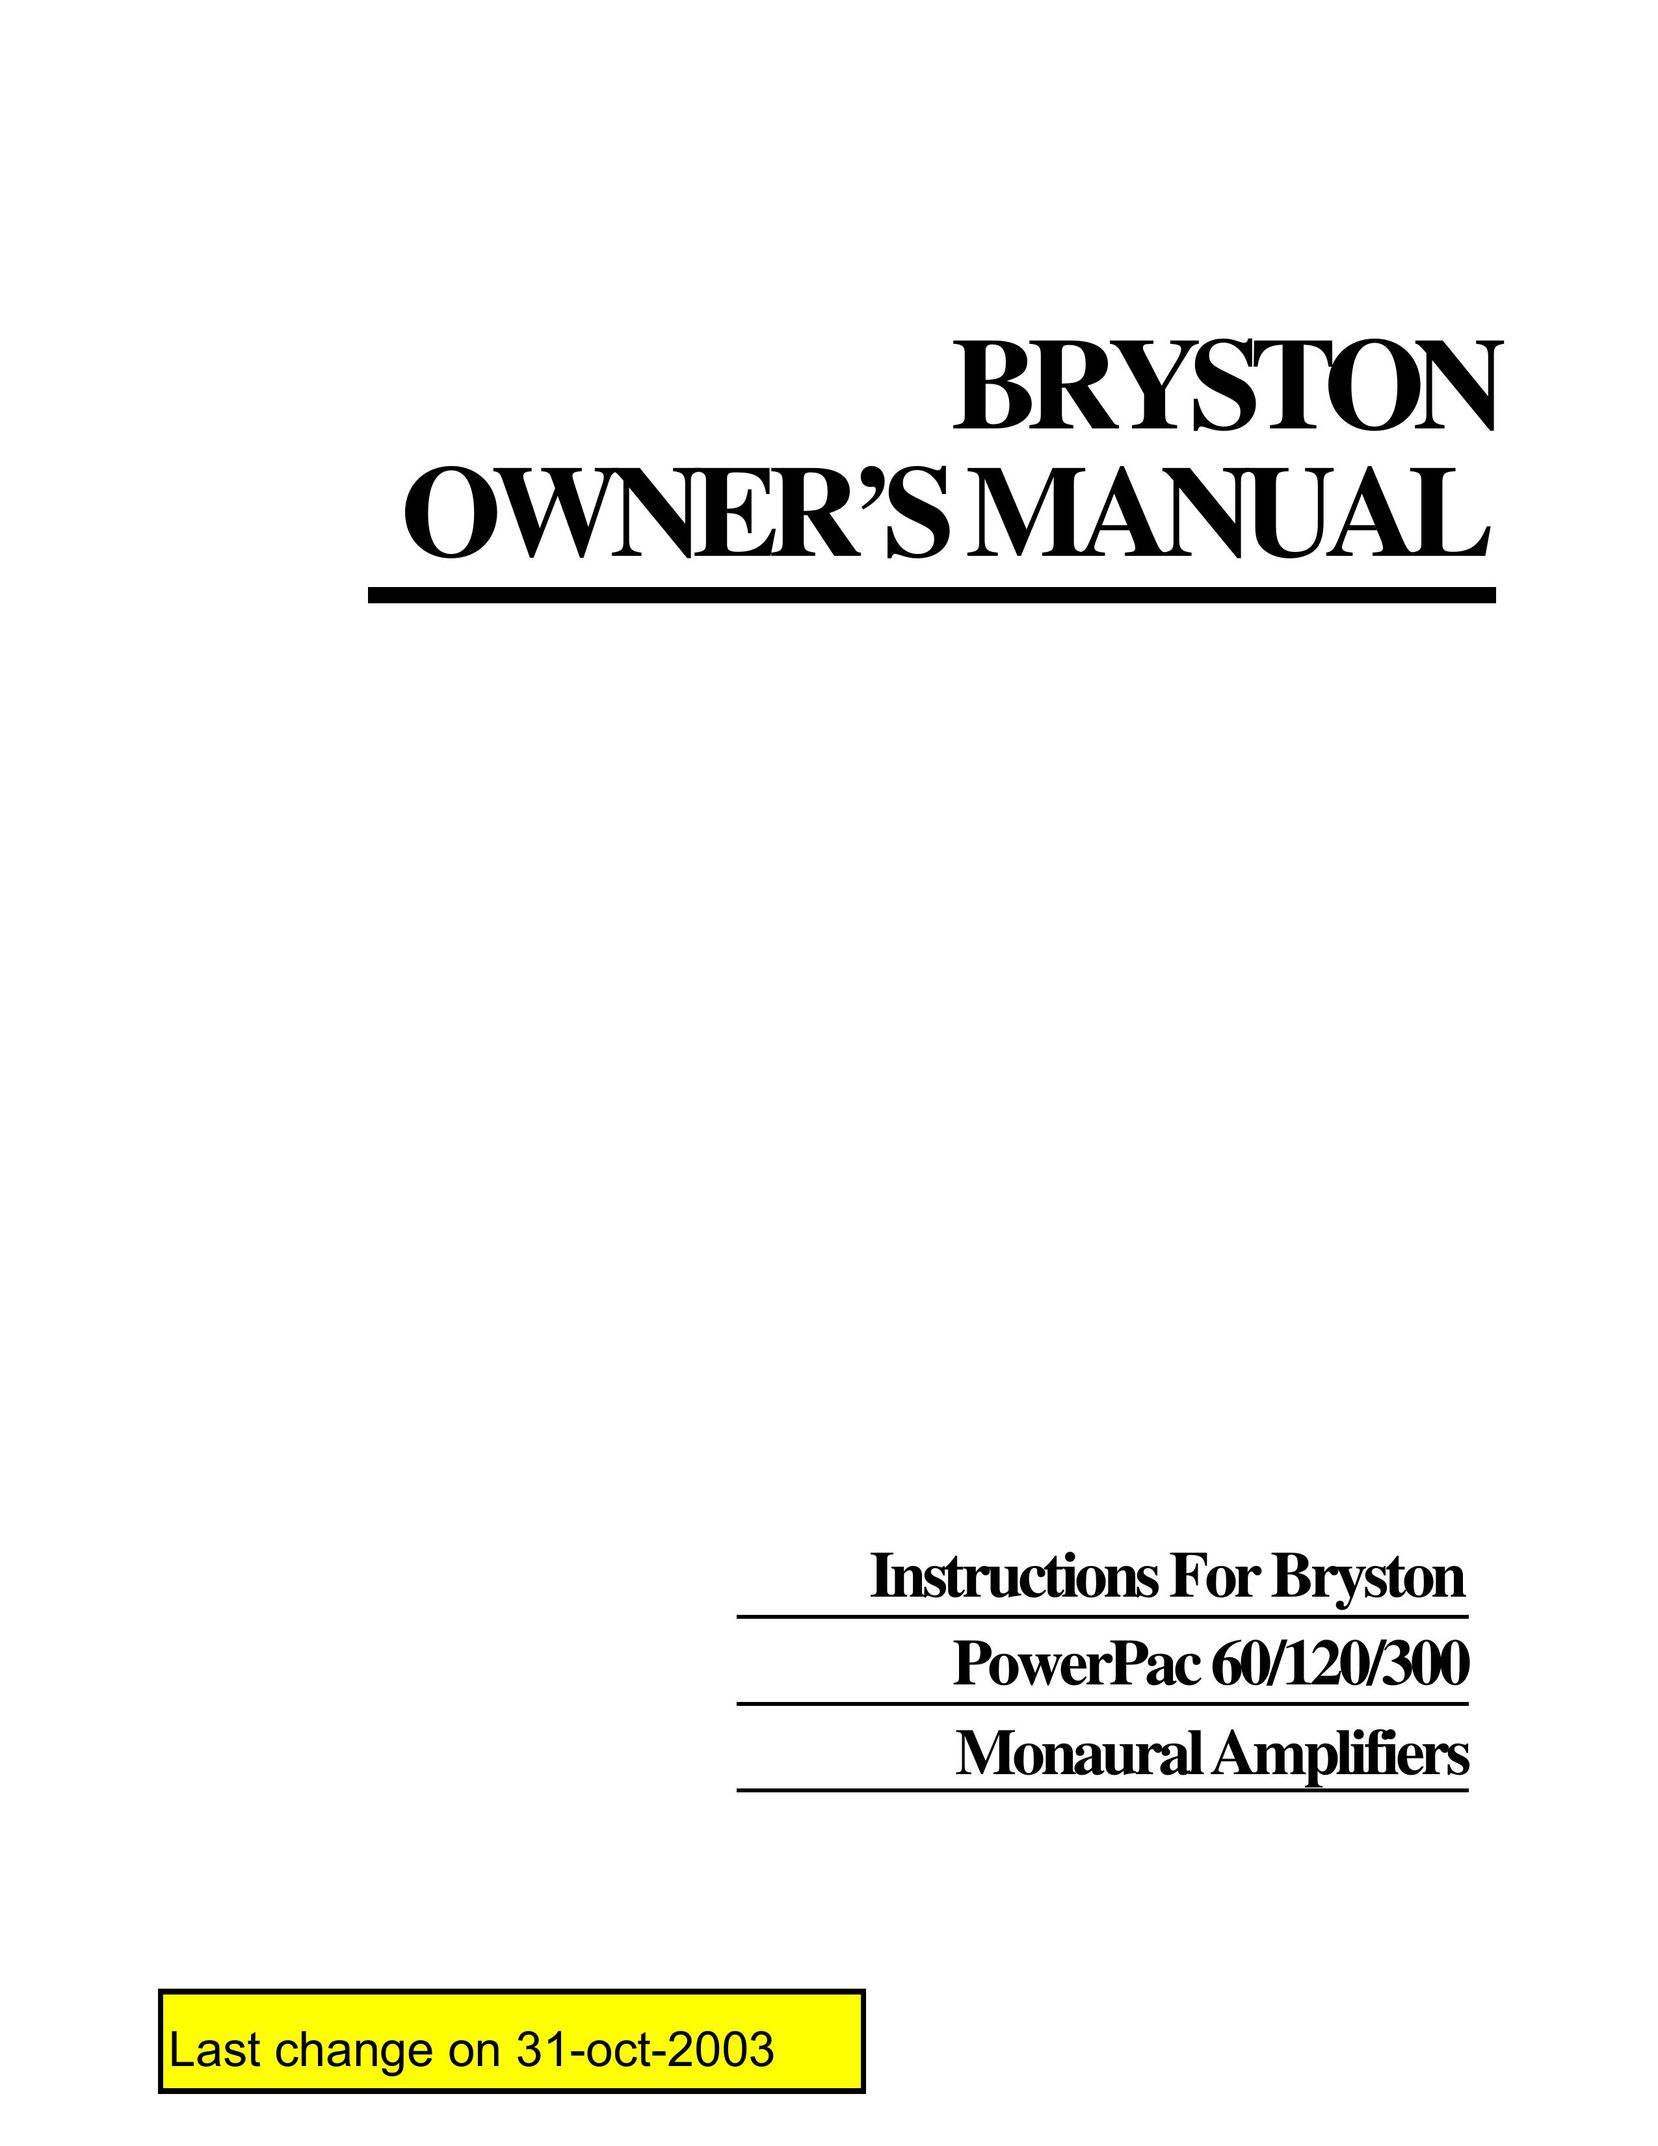 Bryston 60 Stereo Amplifier User Manual